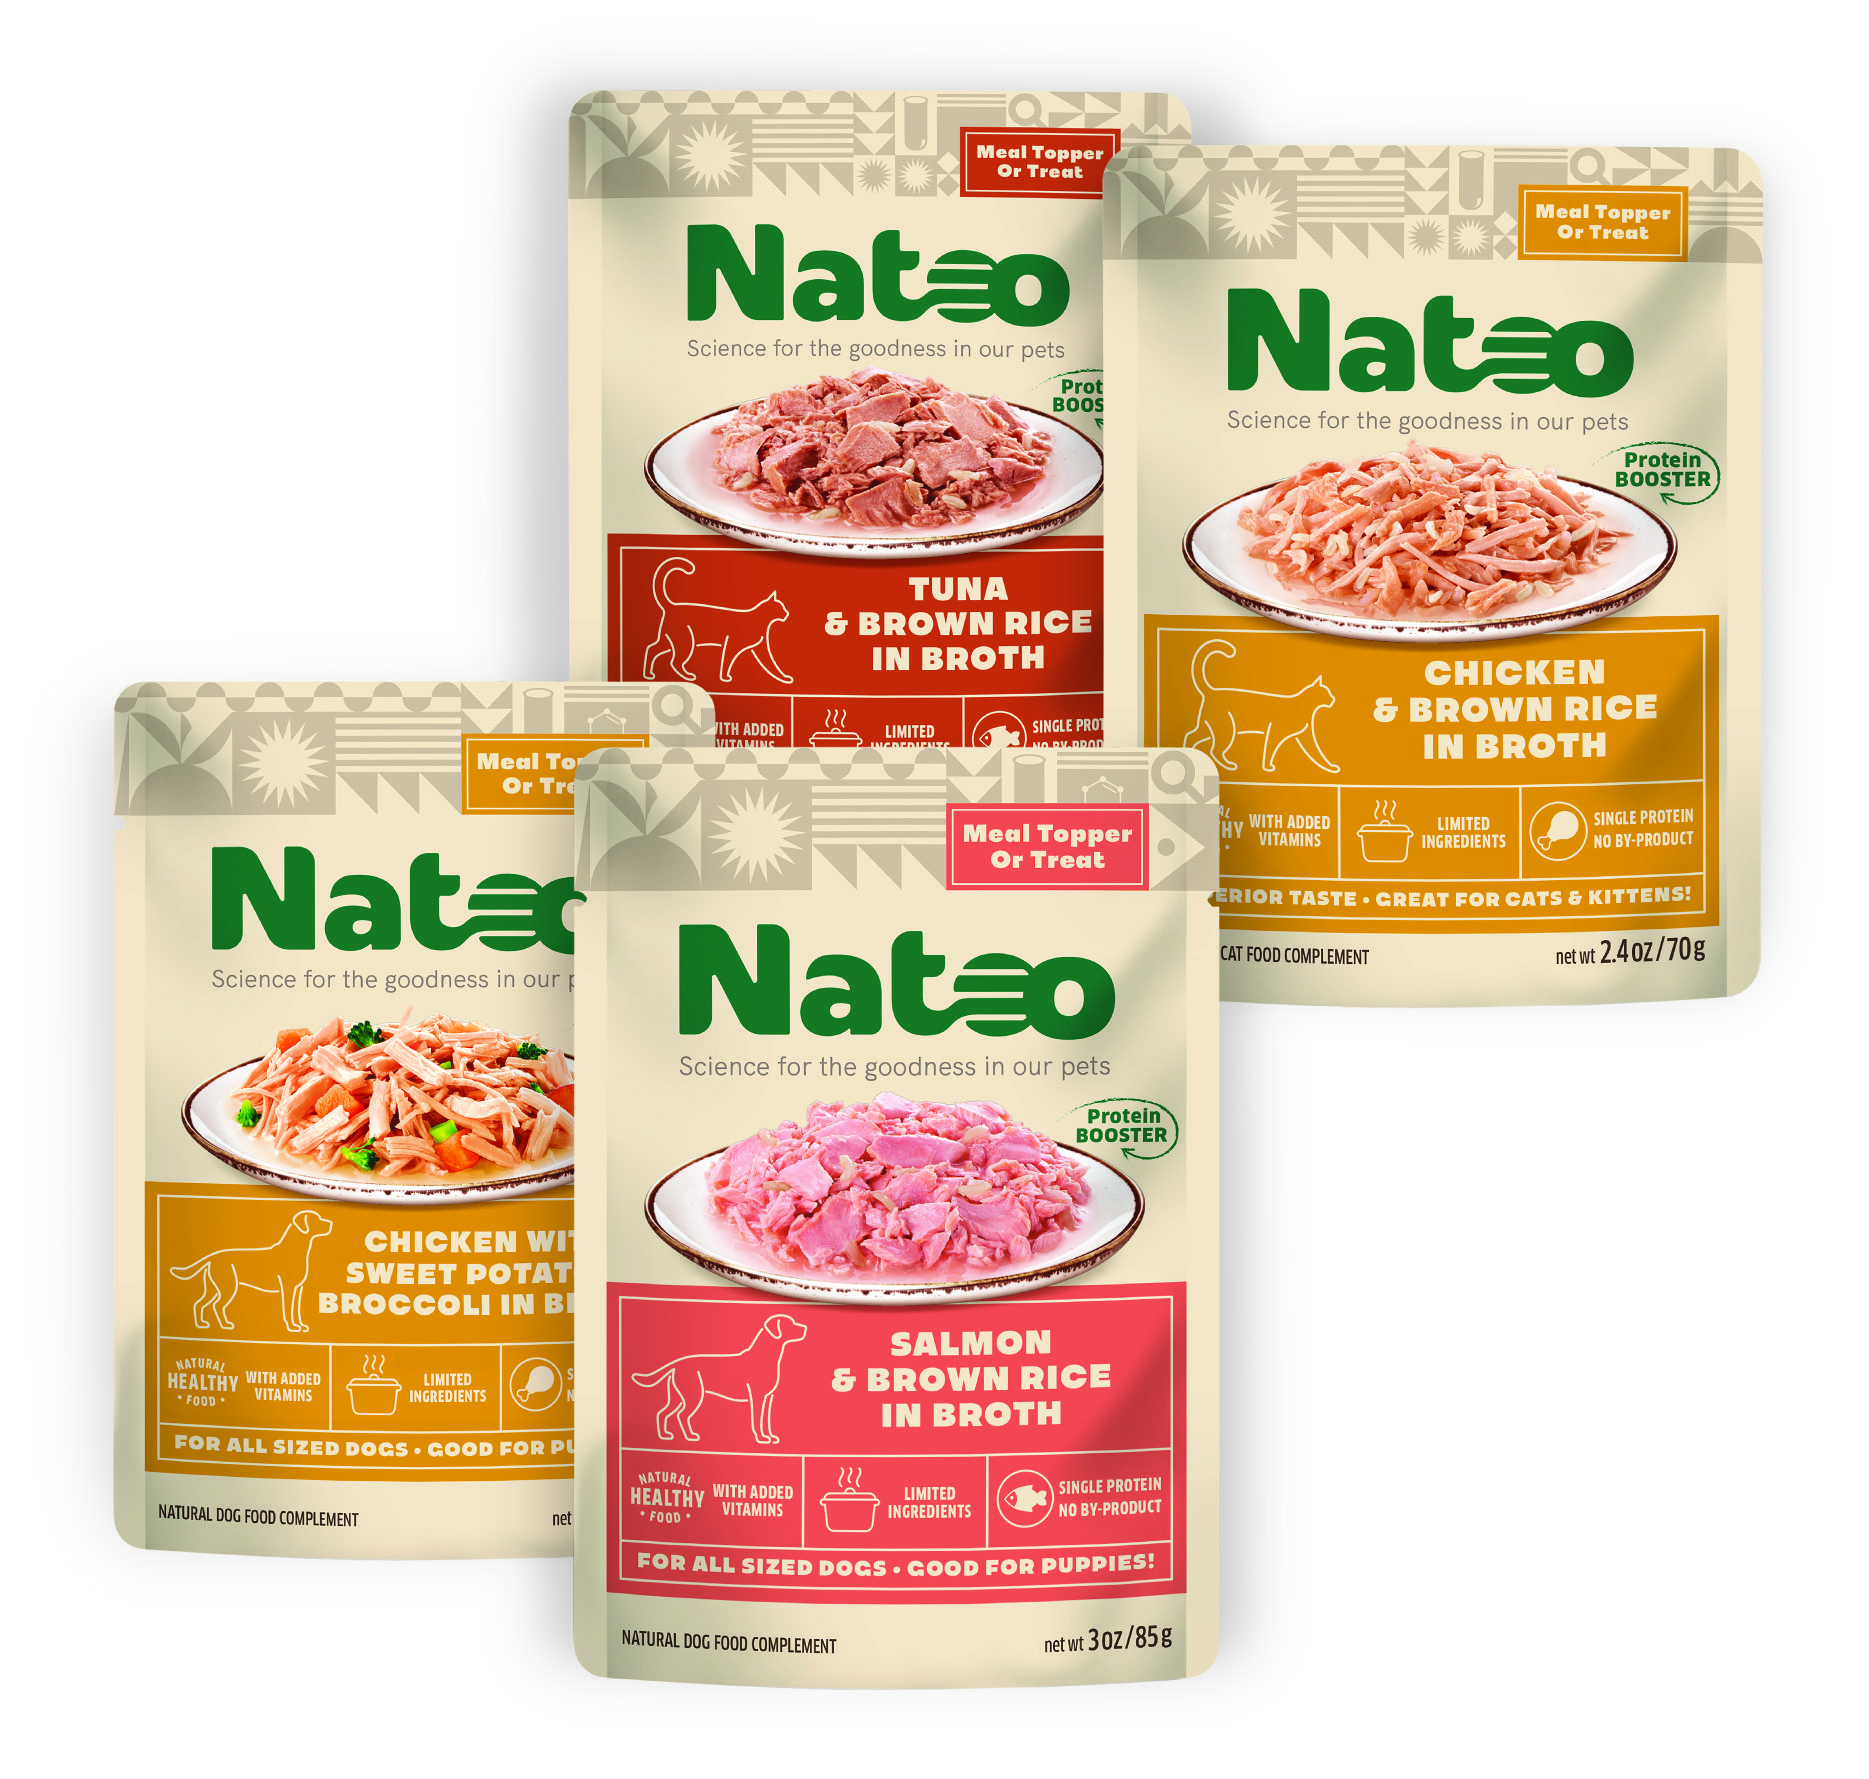 Natoo Debuts Meal Toppers/Treats